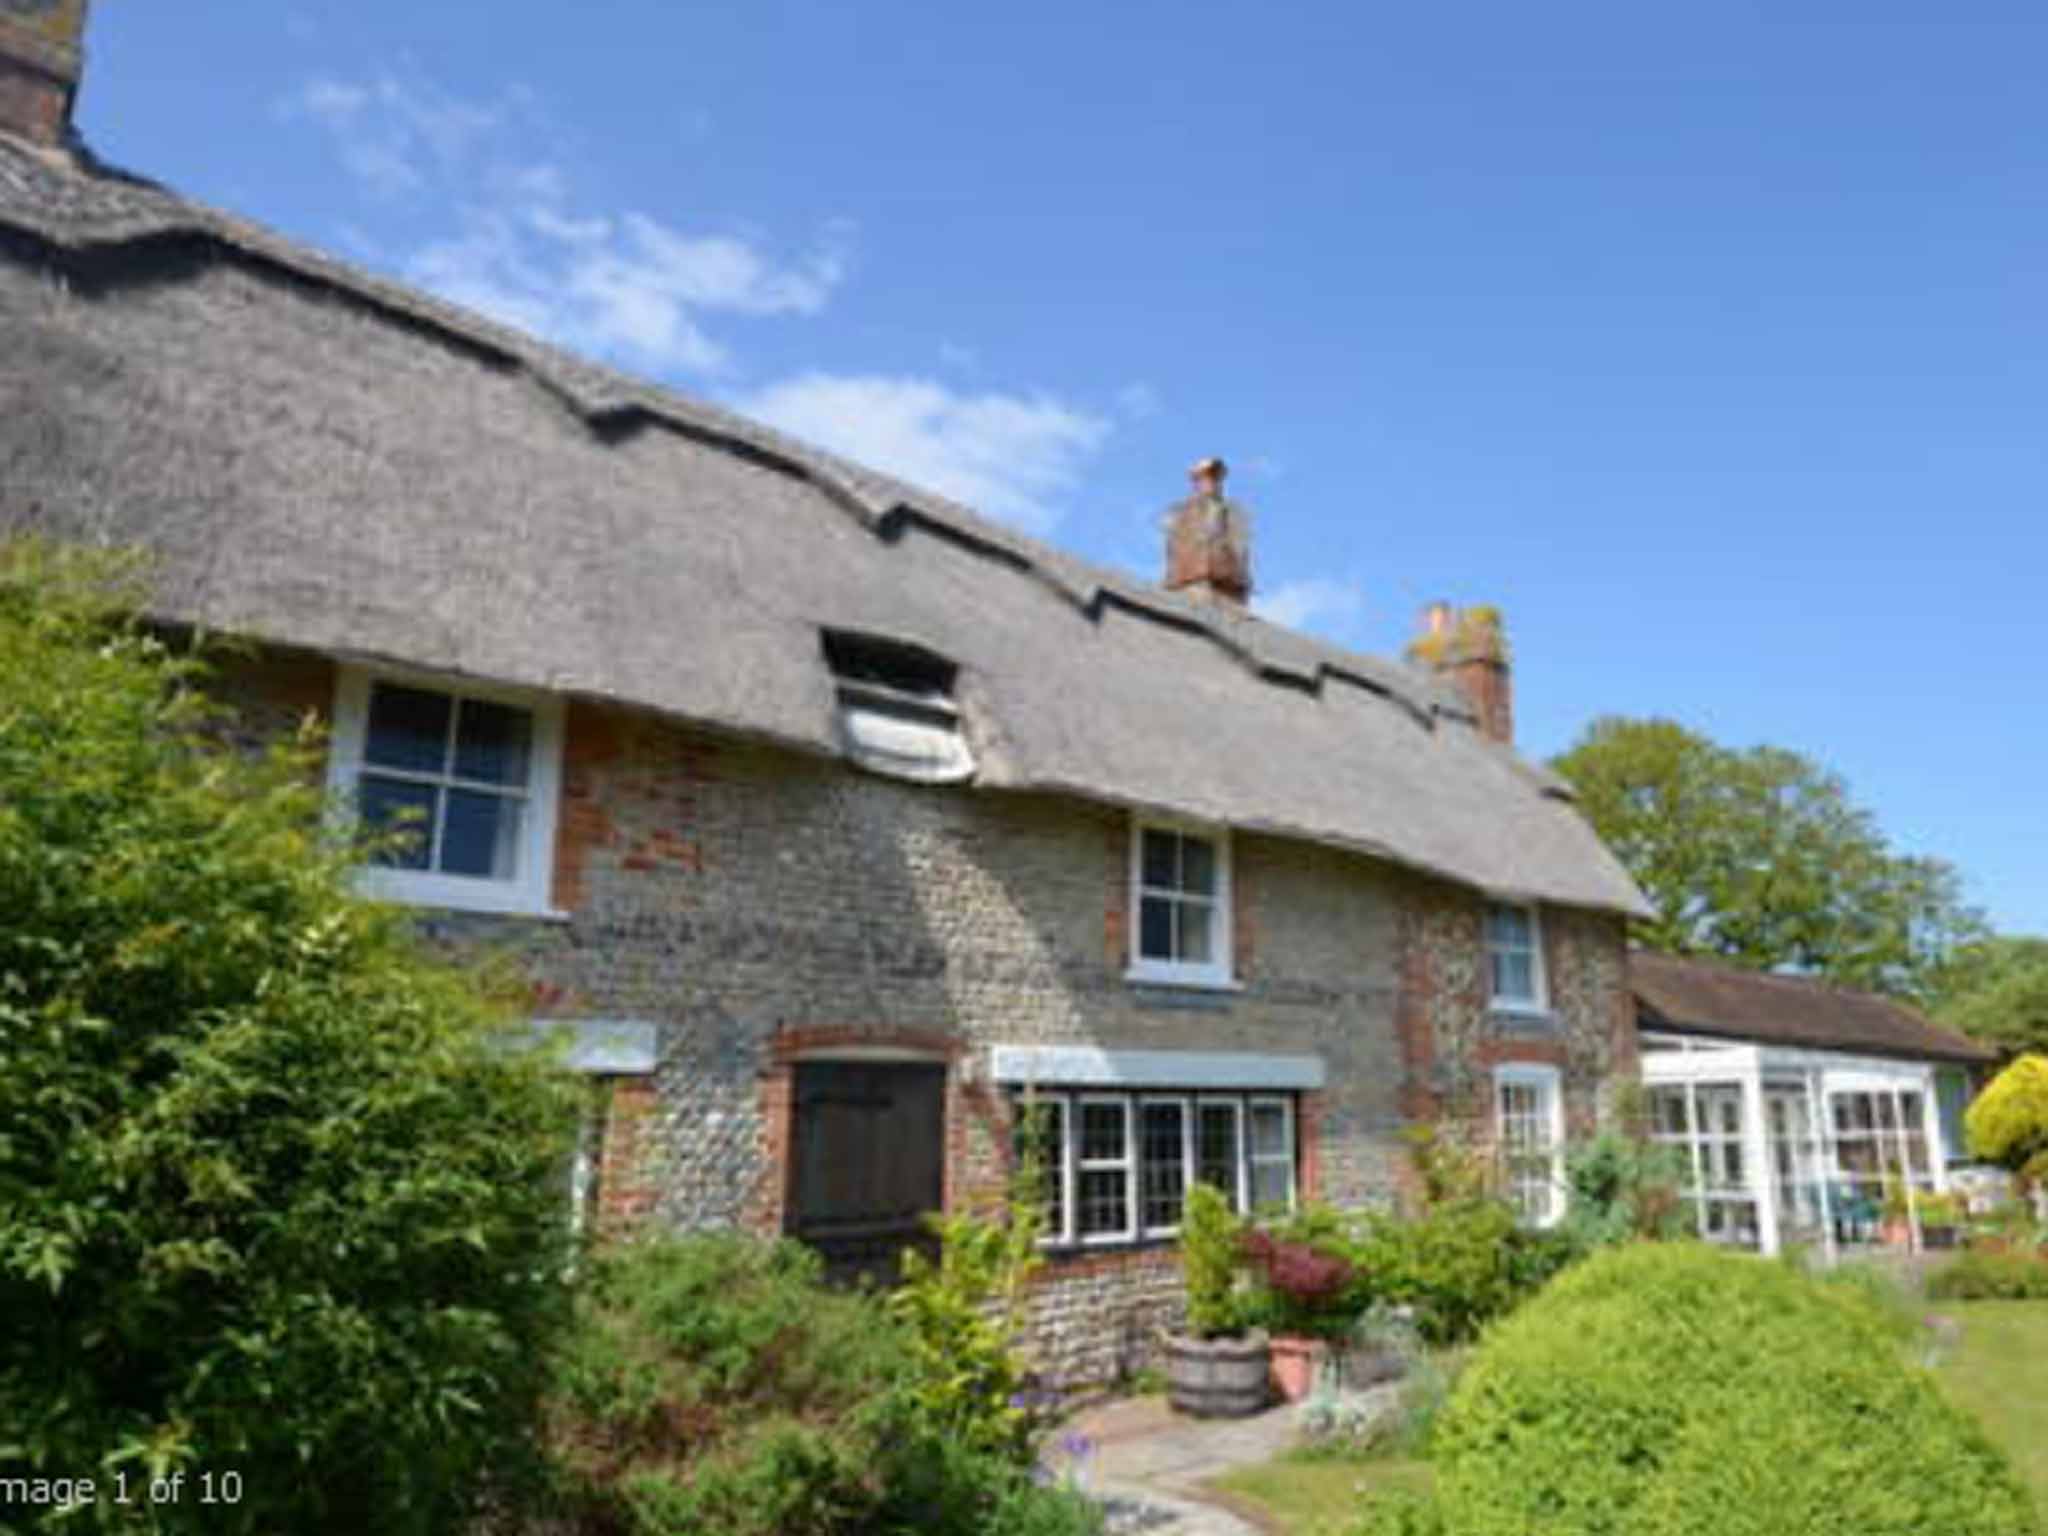 William Blake's Grade-II-listed thatched cottage at Felpham in Sussex, on the market for £650,000 with Jackson Stops